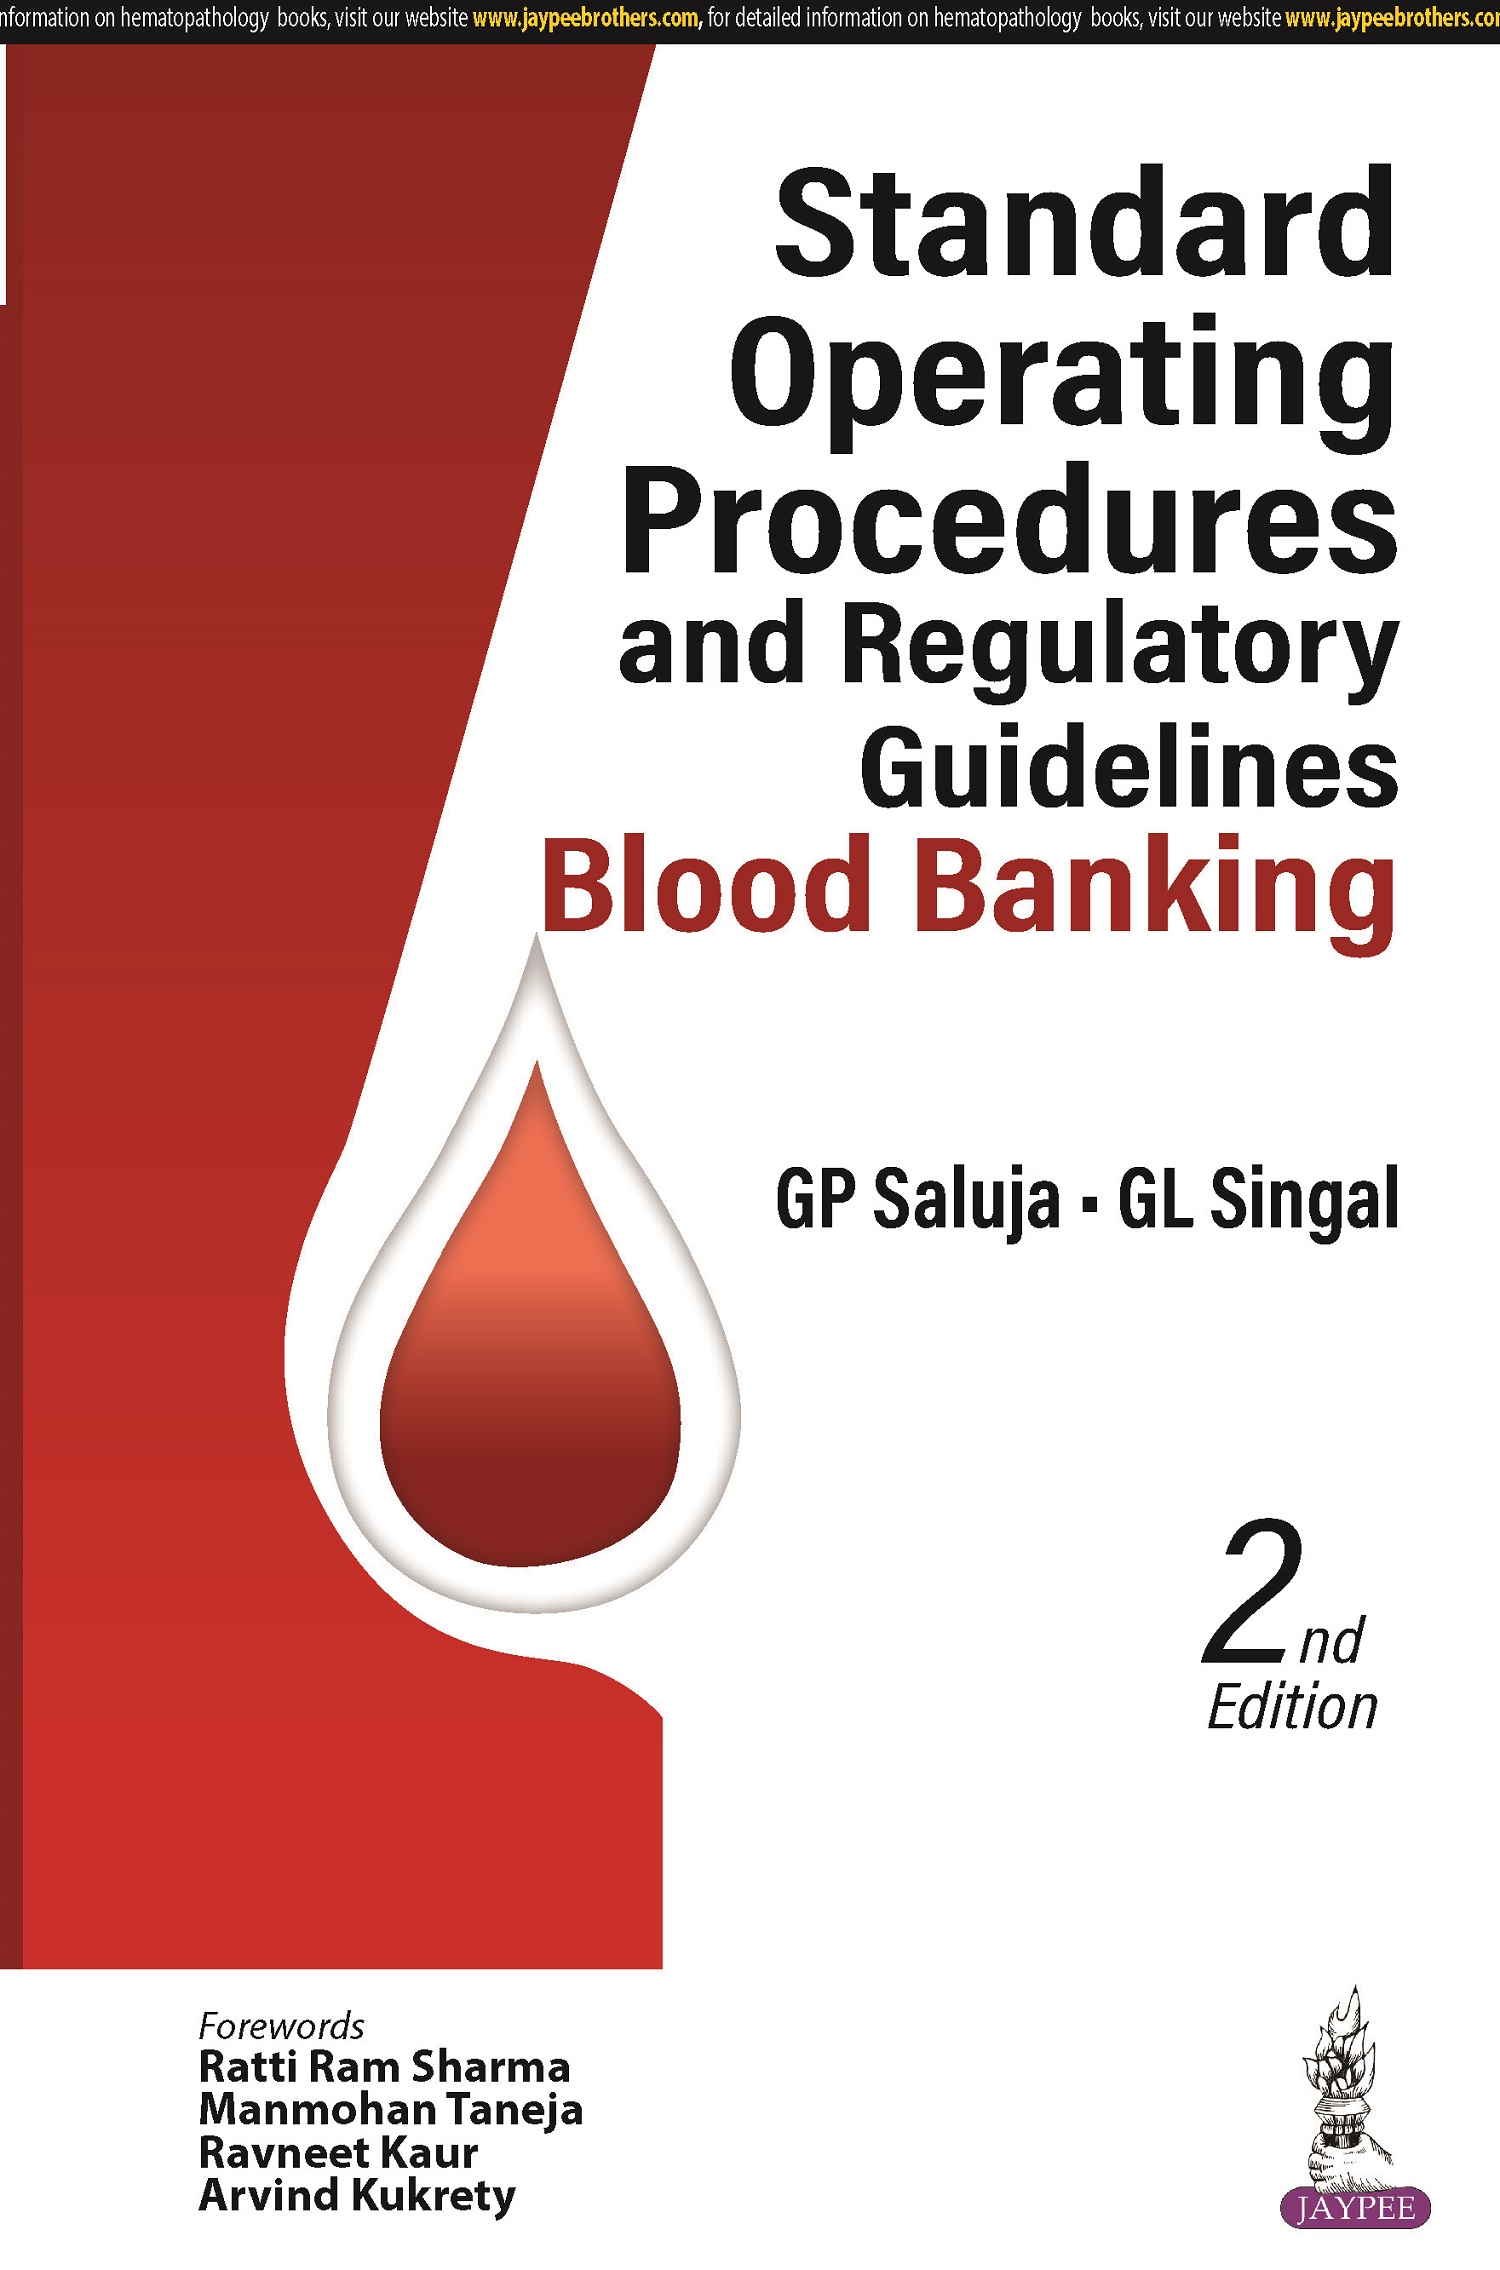 Standard Operating Procedures and Regulatory Guidelines—Blood Banking